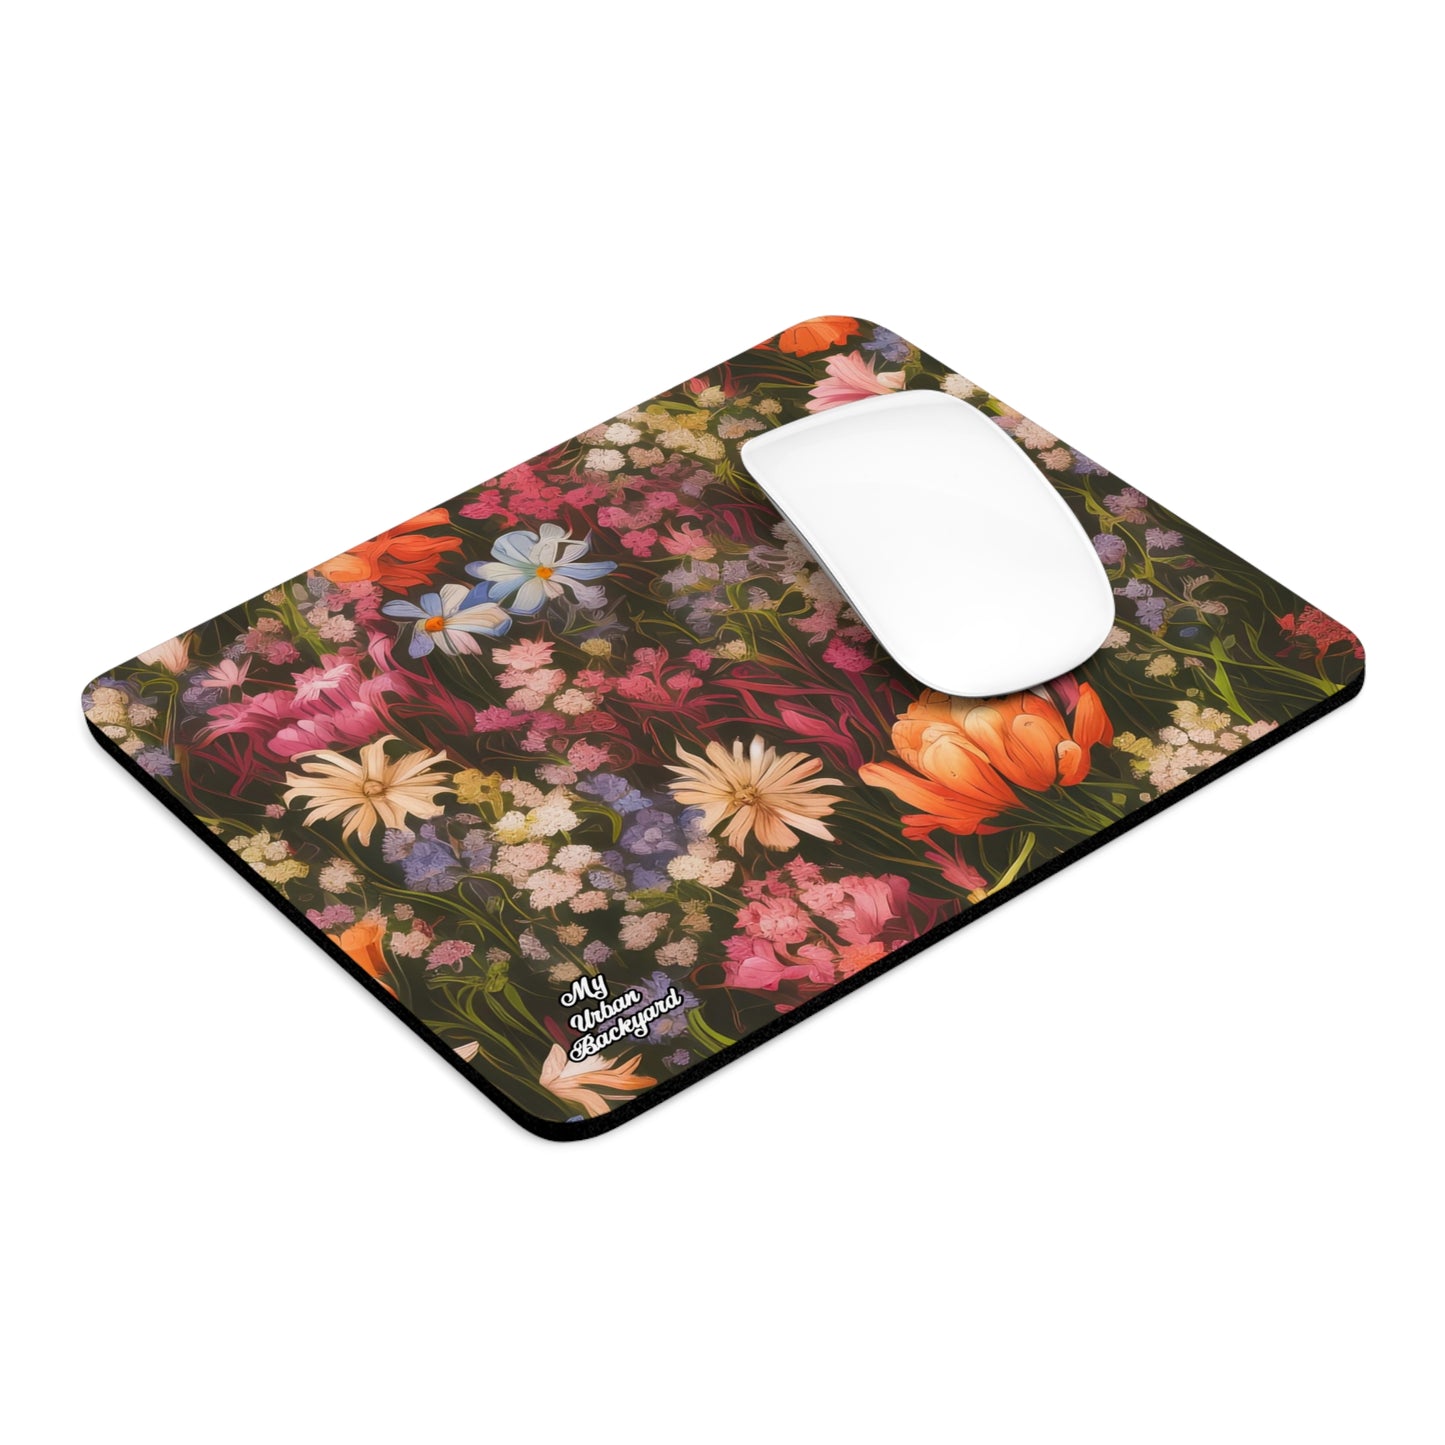 Field of Flowers, Computer Mouse Pad - for Home or Office